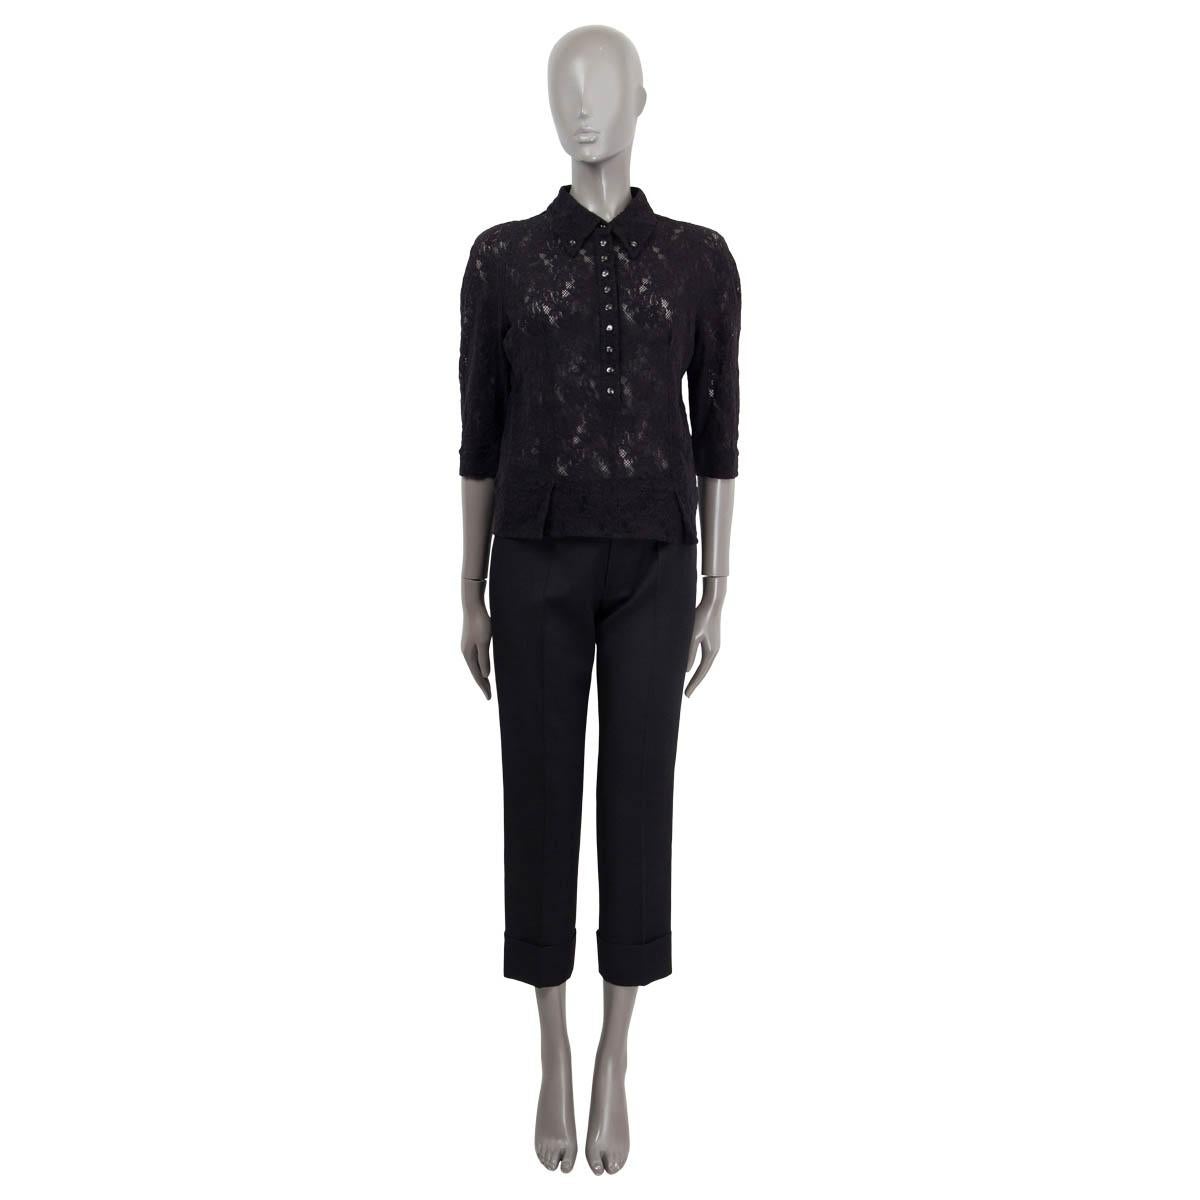 100% authentic Nina Ricci semi-sheer lace button-down blouse in black cotton and elastane (assumed cause tag is missing). Features 3/4 sleeves and buttoned cuffs. Opens with buttons on the front. Unlined. Has been worn and is in excellent